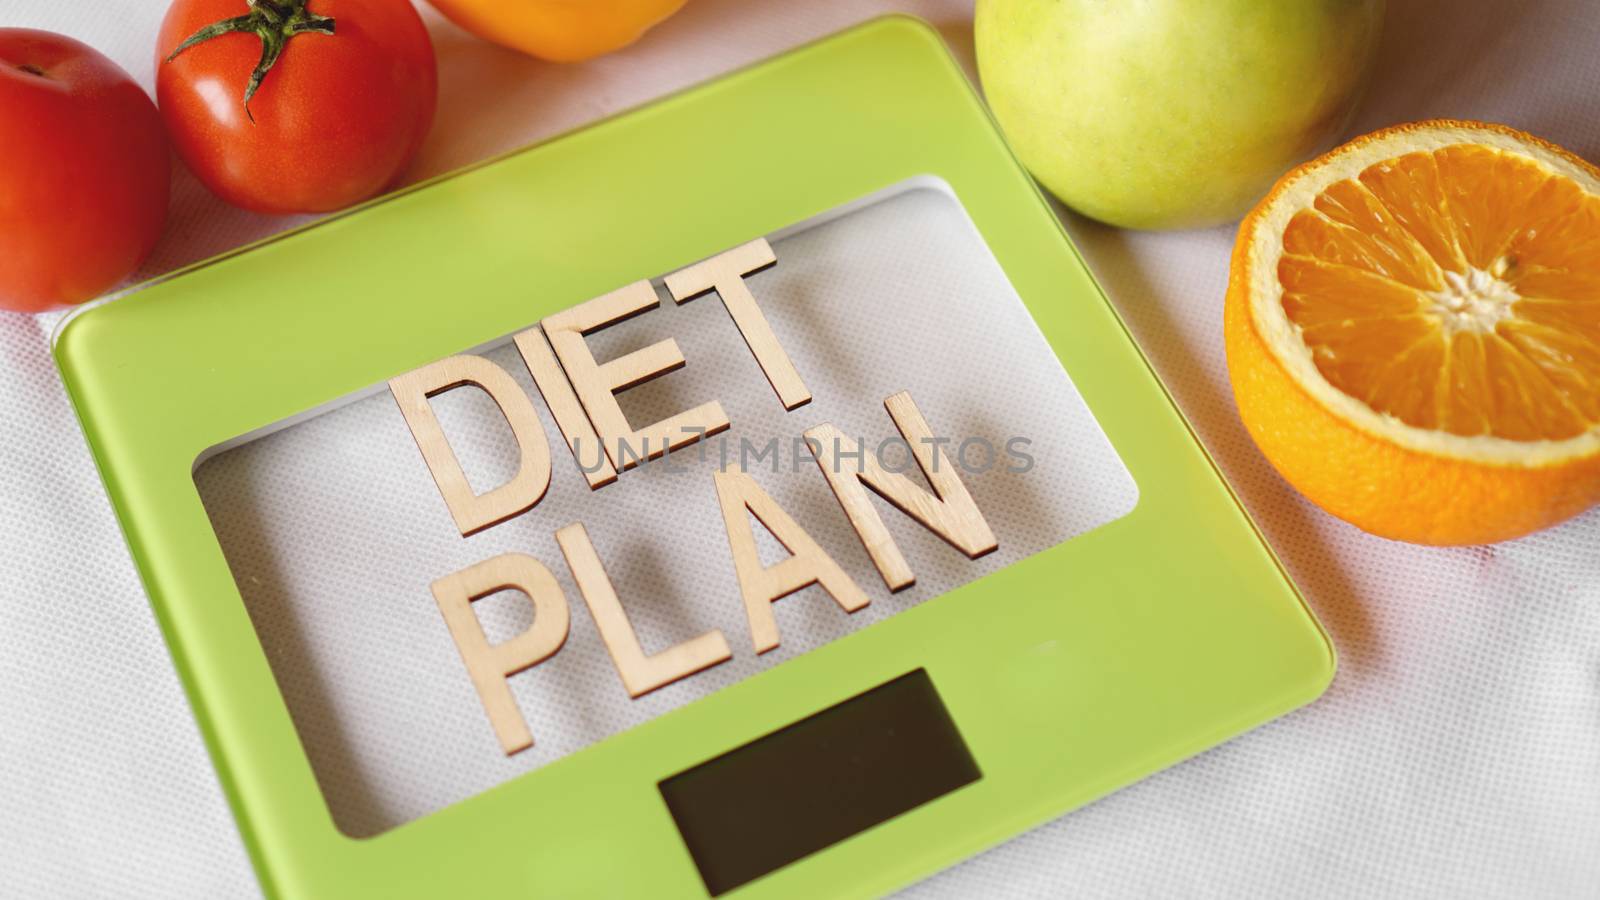 Concept diet. Healthy food, kitchen weight scale. Vegetables and fruits lettering Diet plan